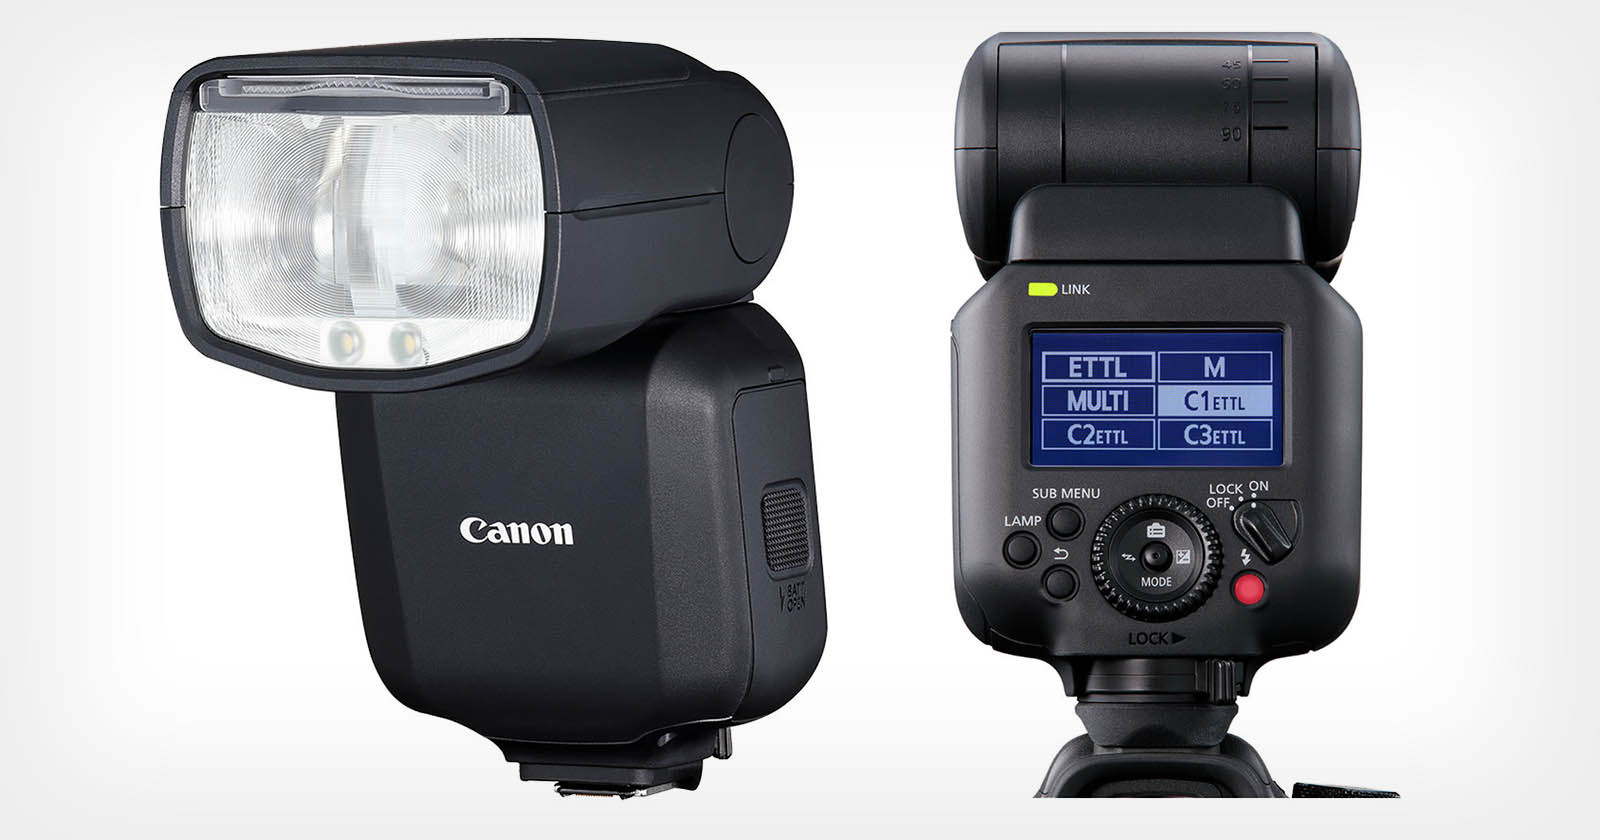 Canons New Speedlite EL-5 is the First Flash Made for EOS R Mirrorless